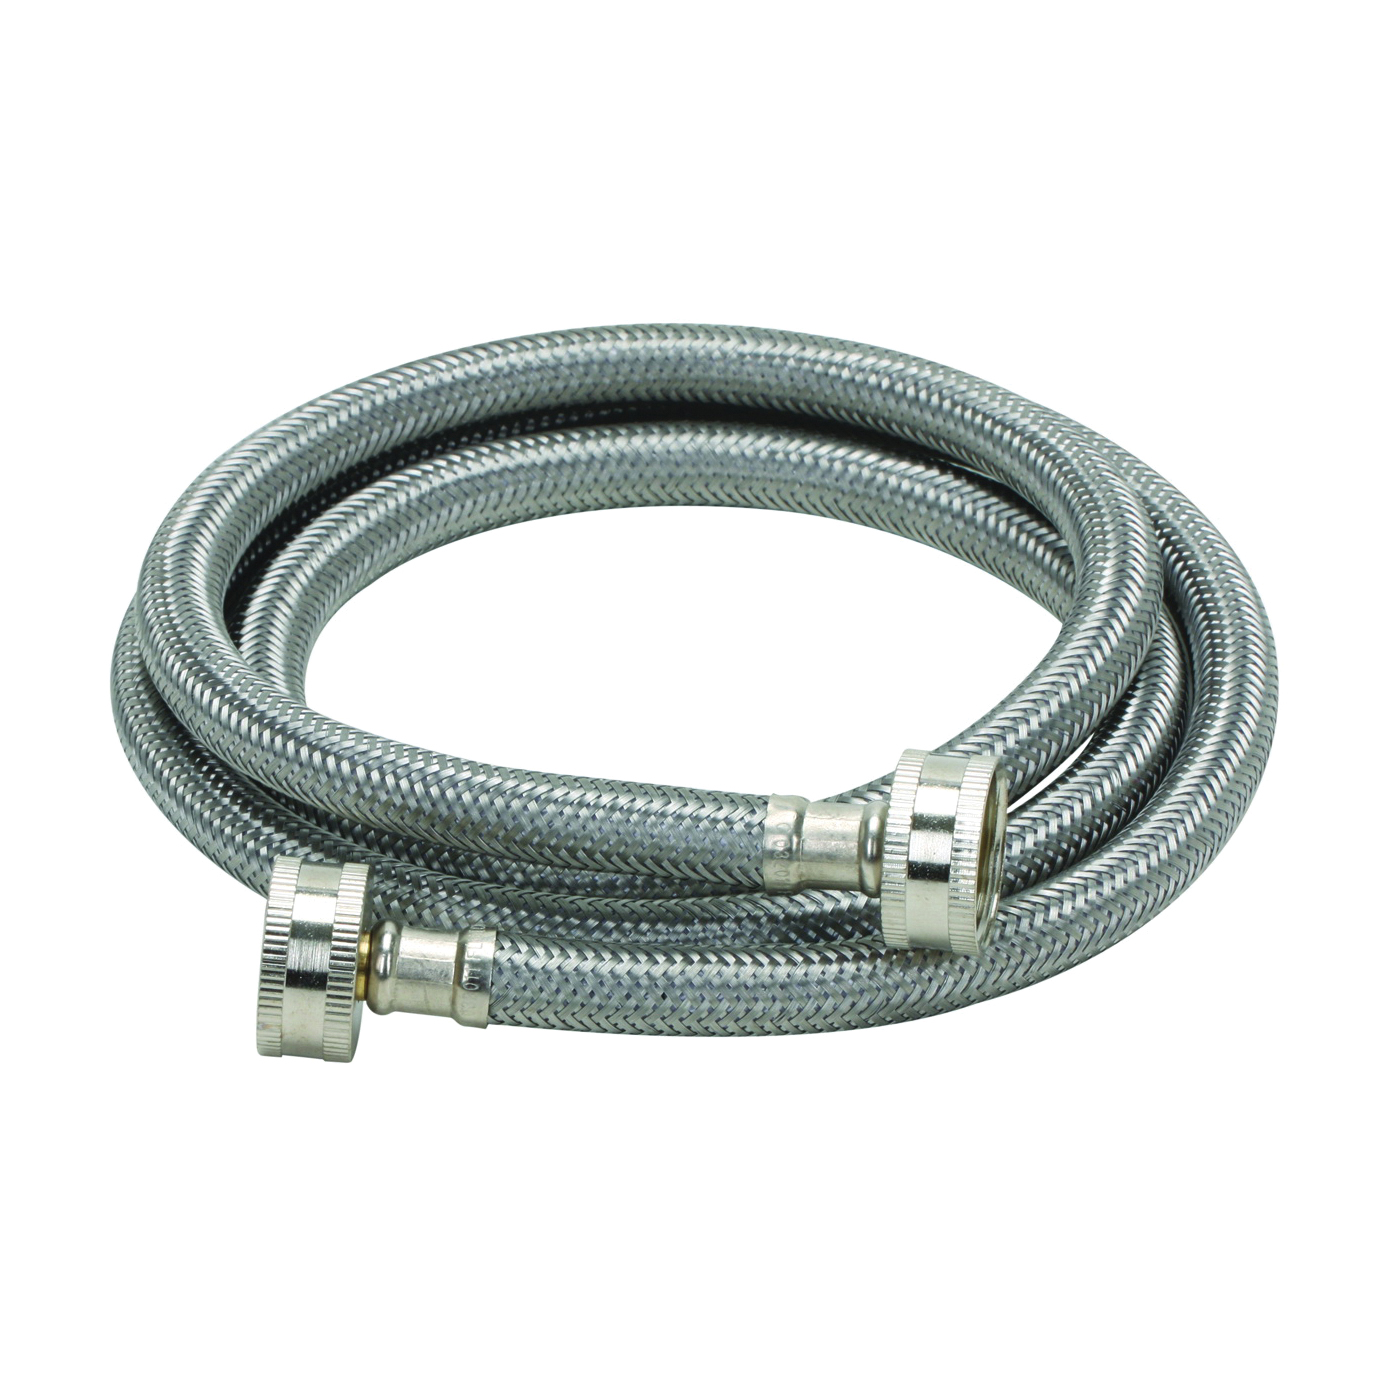 Fluidmaster 9WM60 Washing Machine Discharge Hose, 3/4 in ID, 60 in L, Female, Stainless Steel - 1